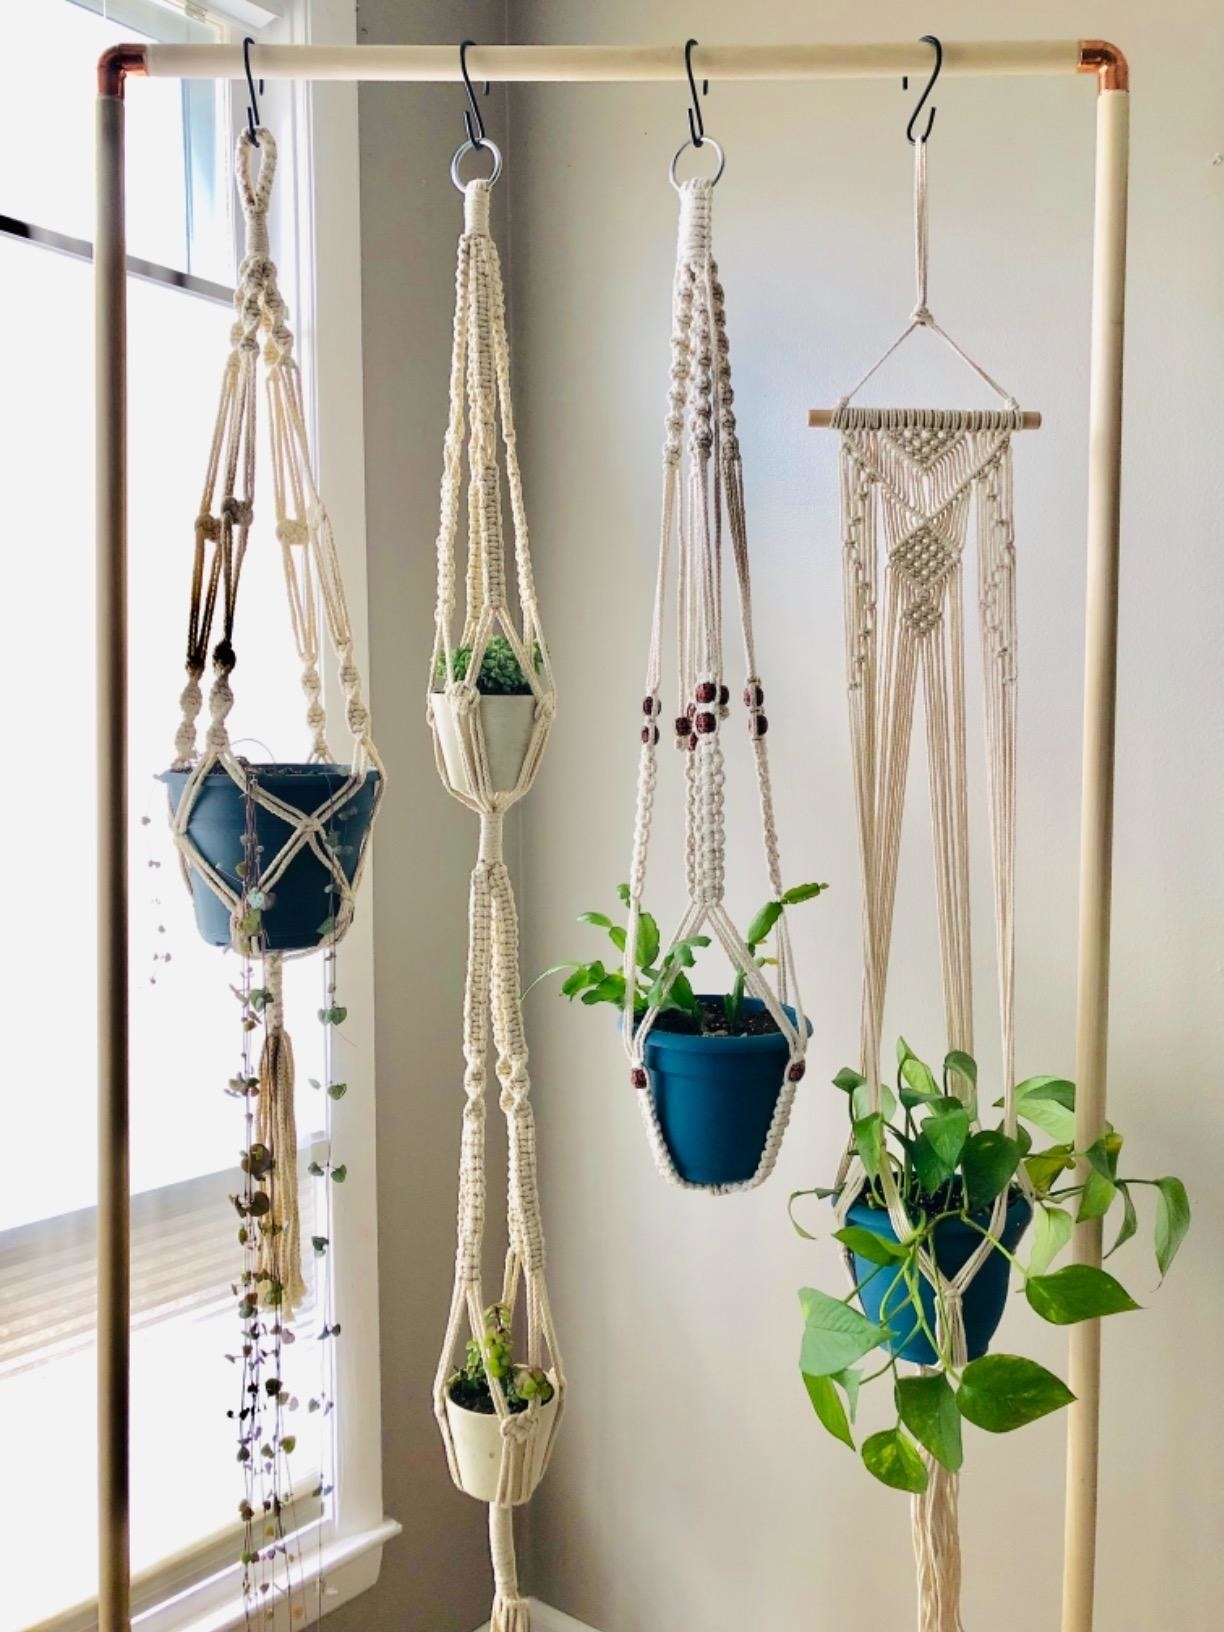 Review photo of the macrame holders and planters hanging from a garment rack